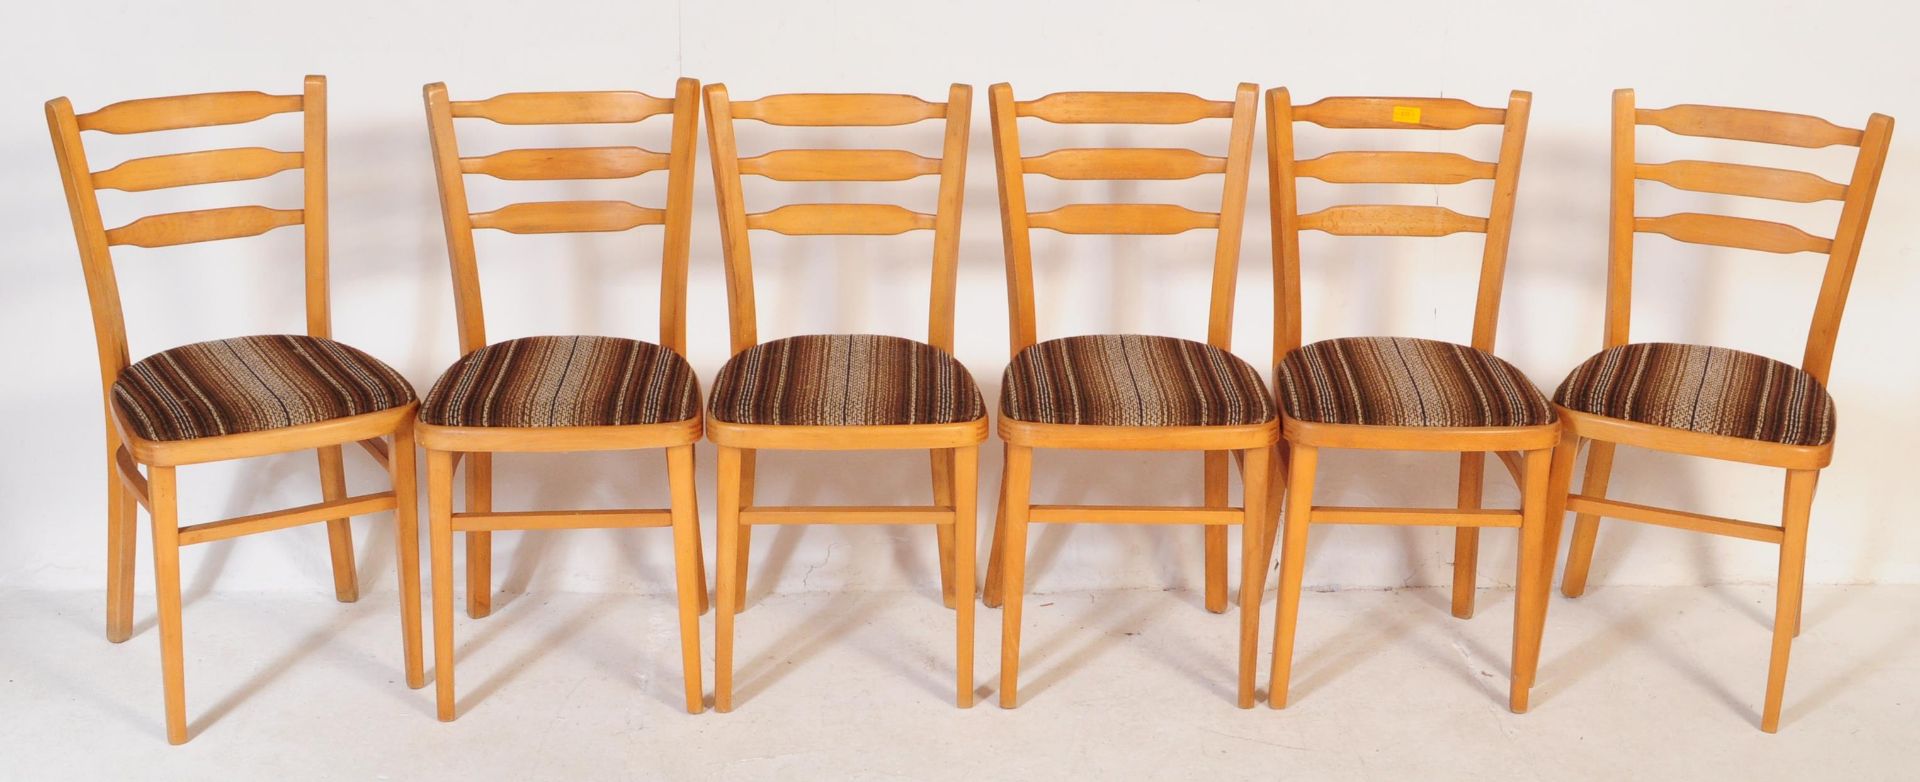 SIX VINTAGE RETRO 1960S KITCHEN DINING CHAIRS - Image 2 of 5